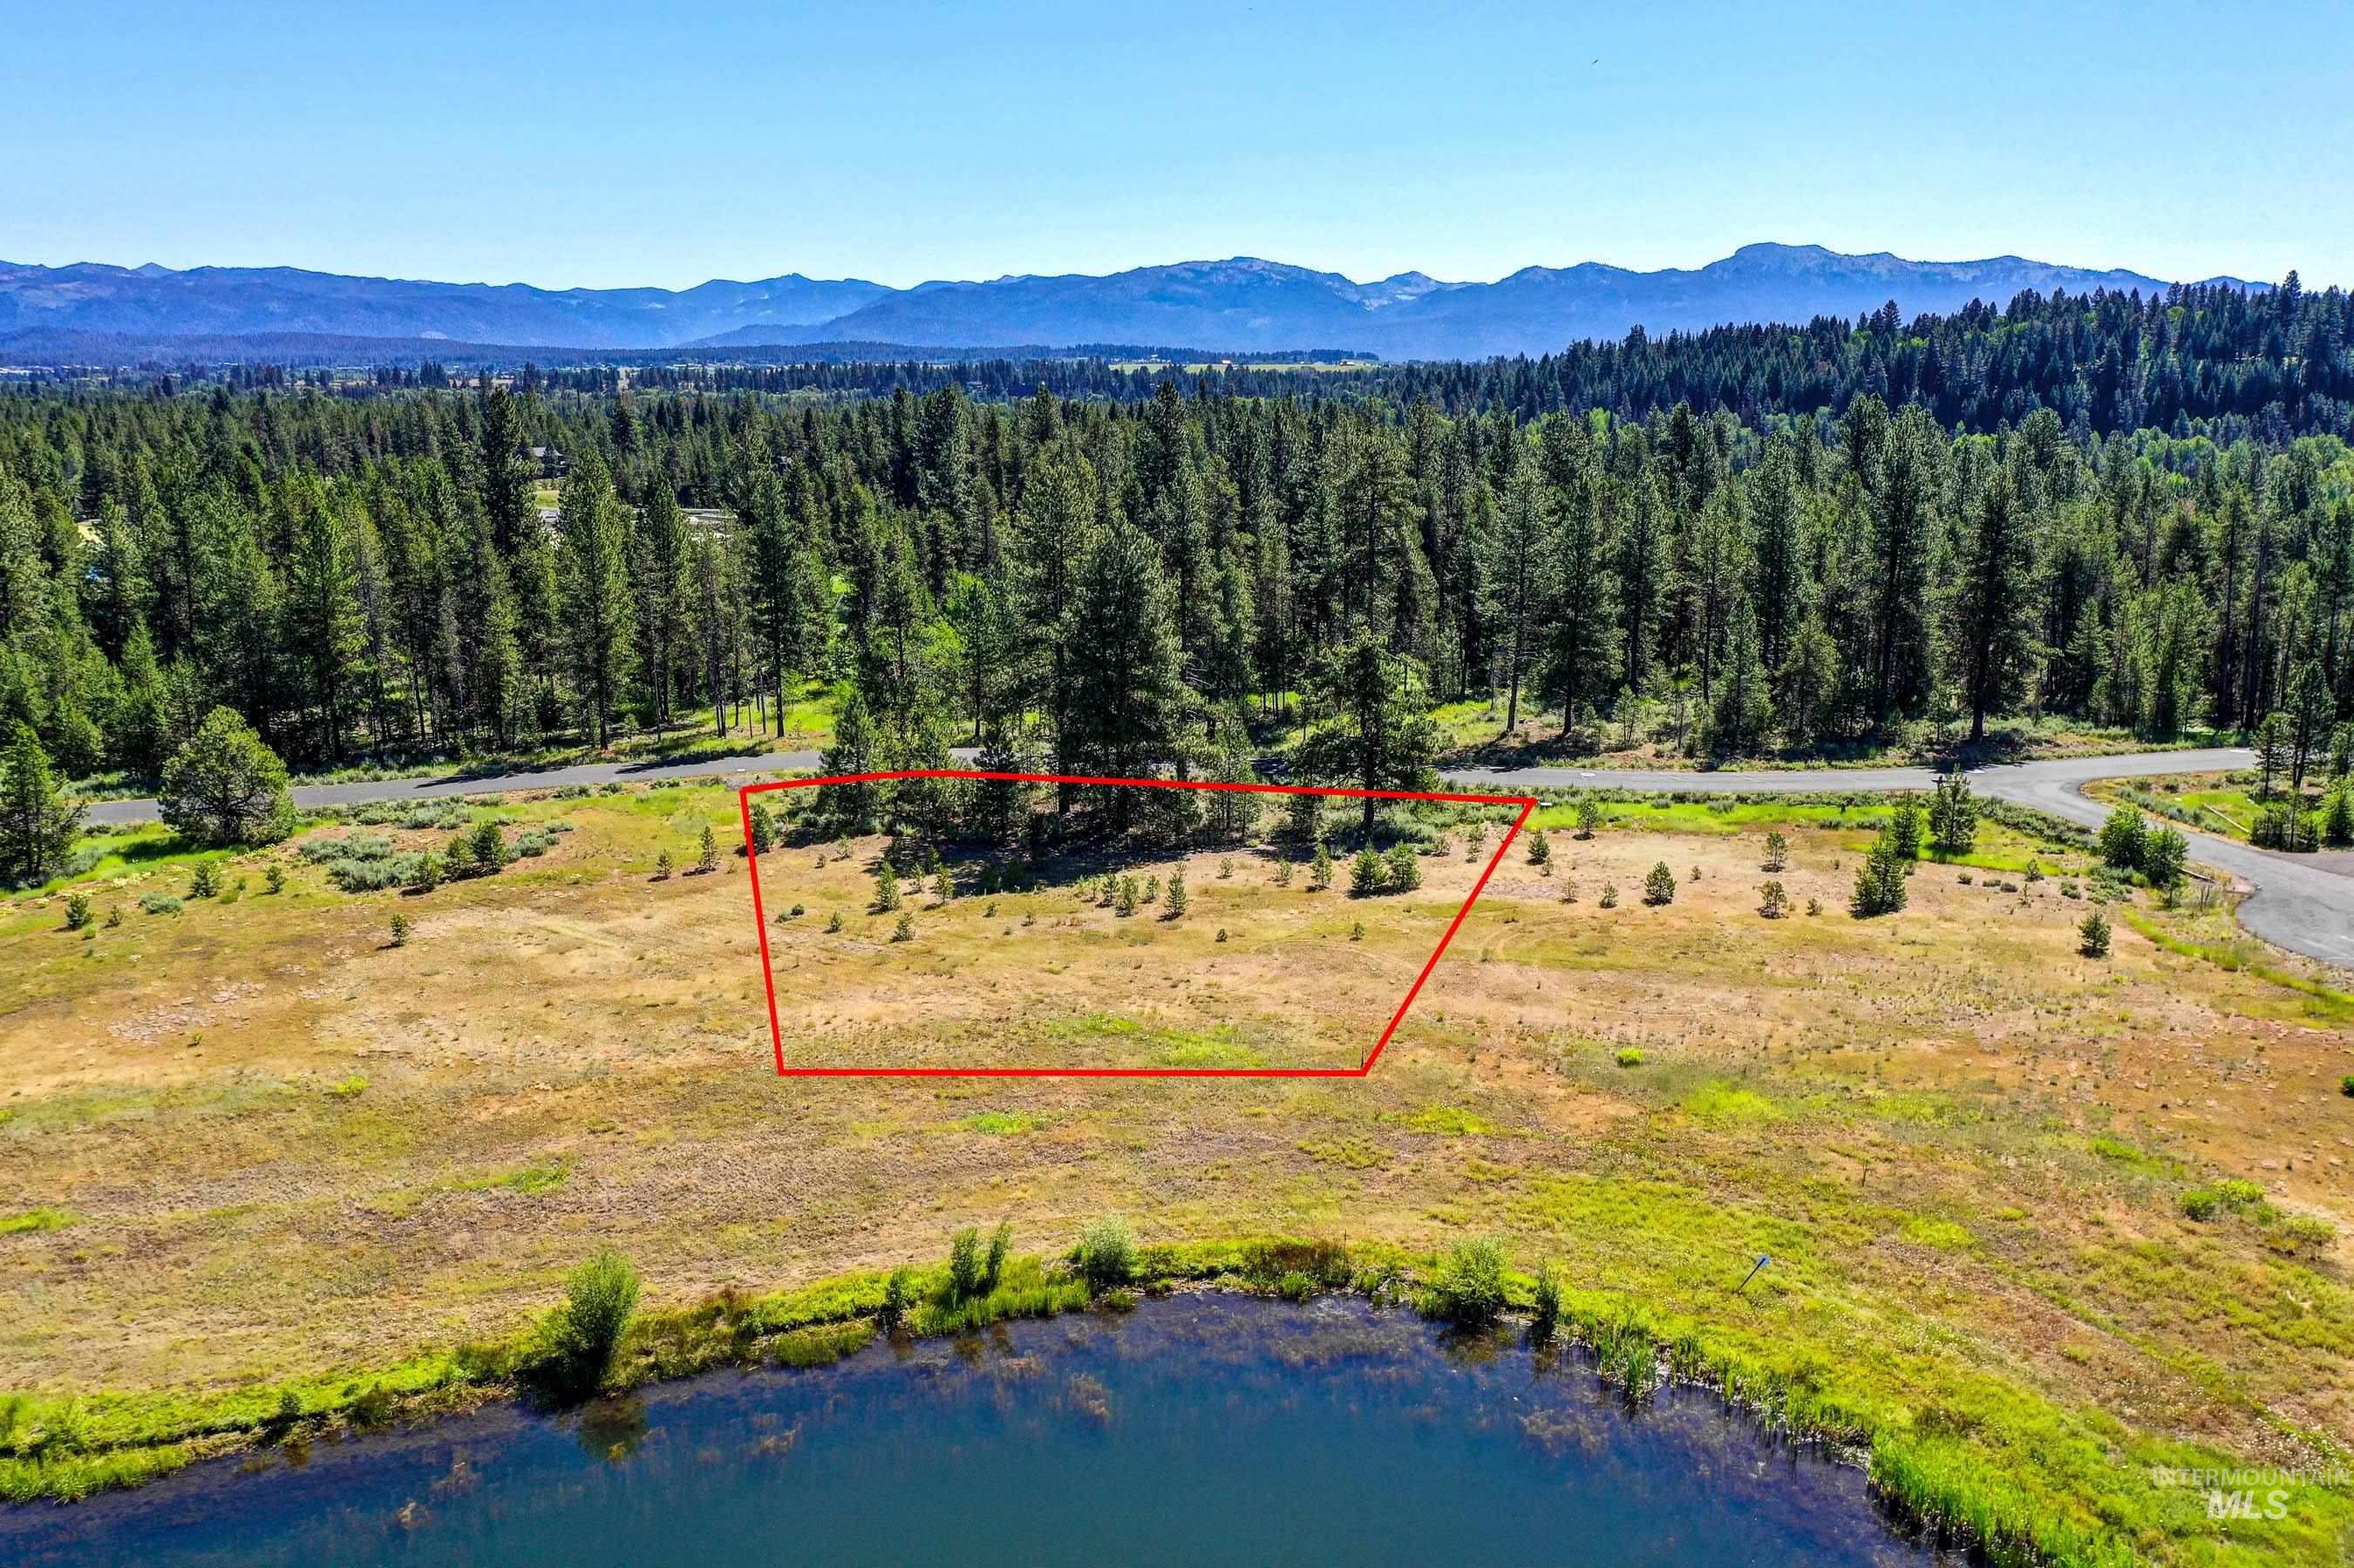 86 Fawnlilly, McCall, Idaho 83638, Land For Sale, Price $235,000,MLS 98908870